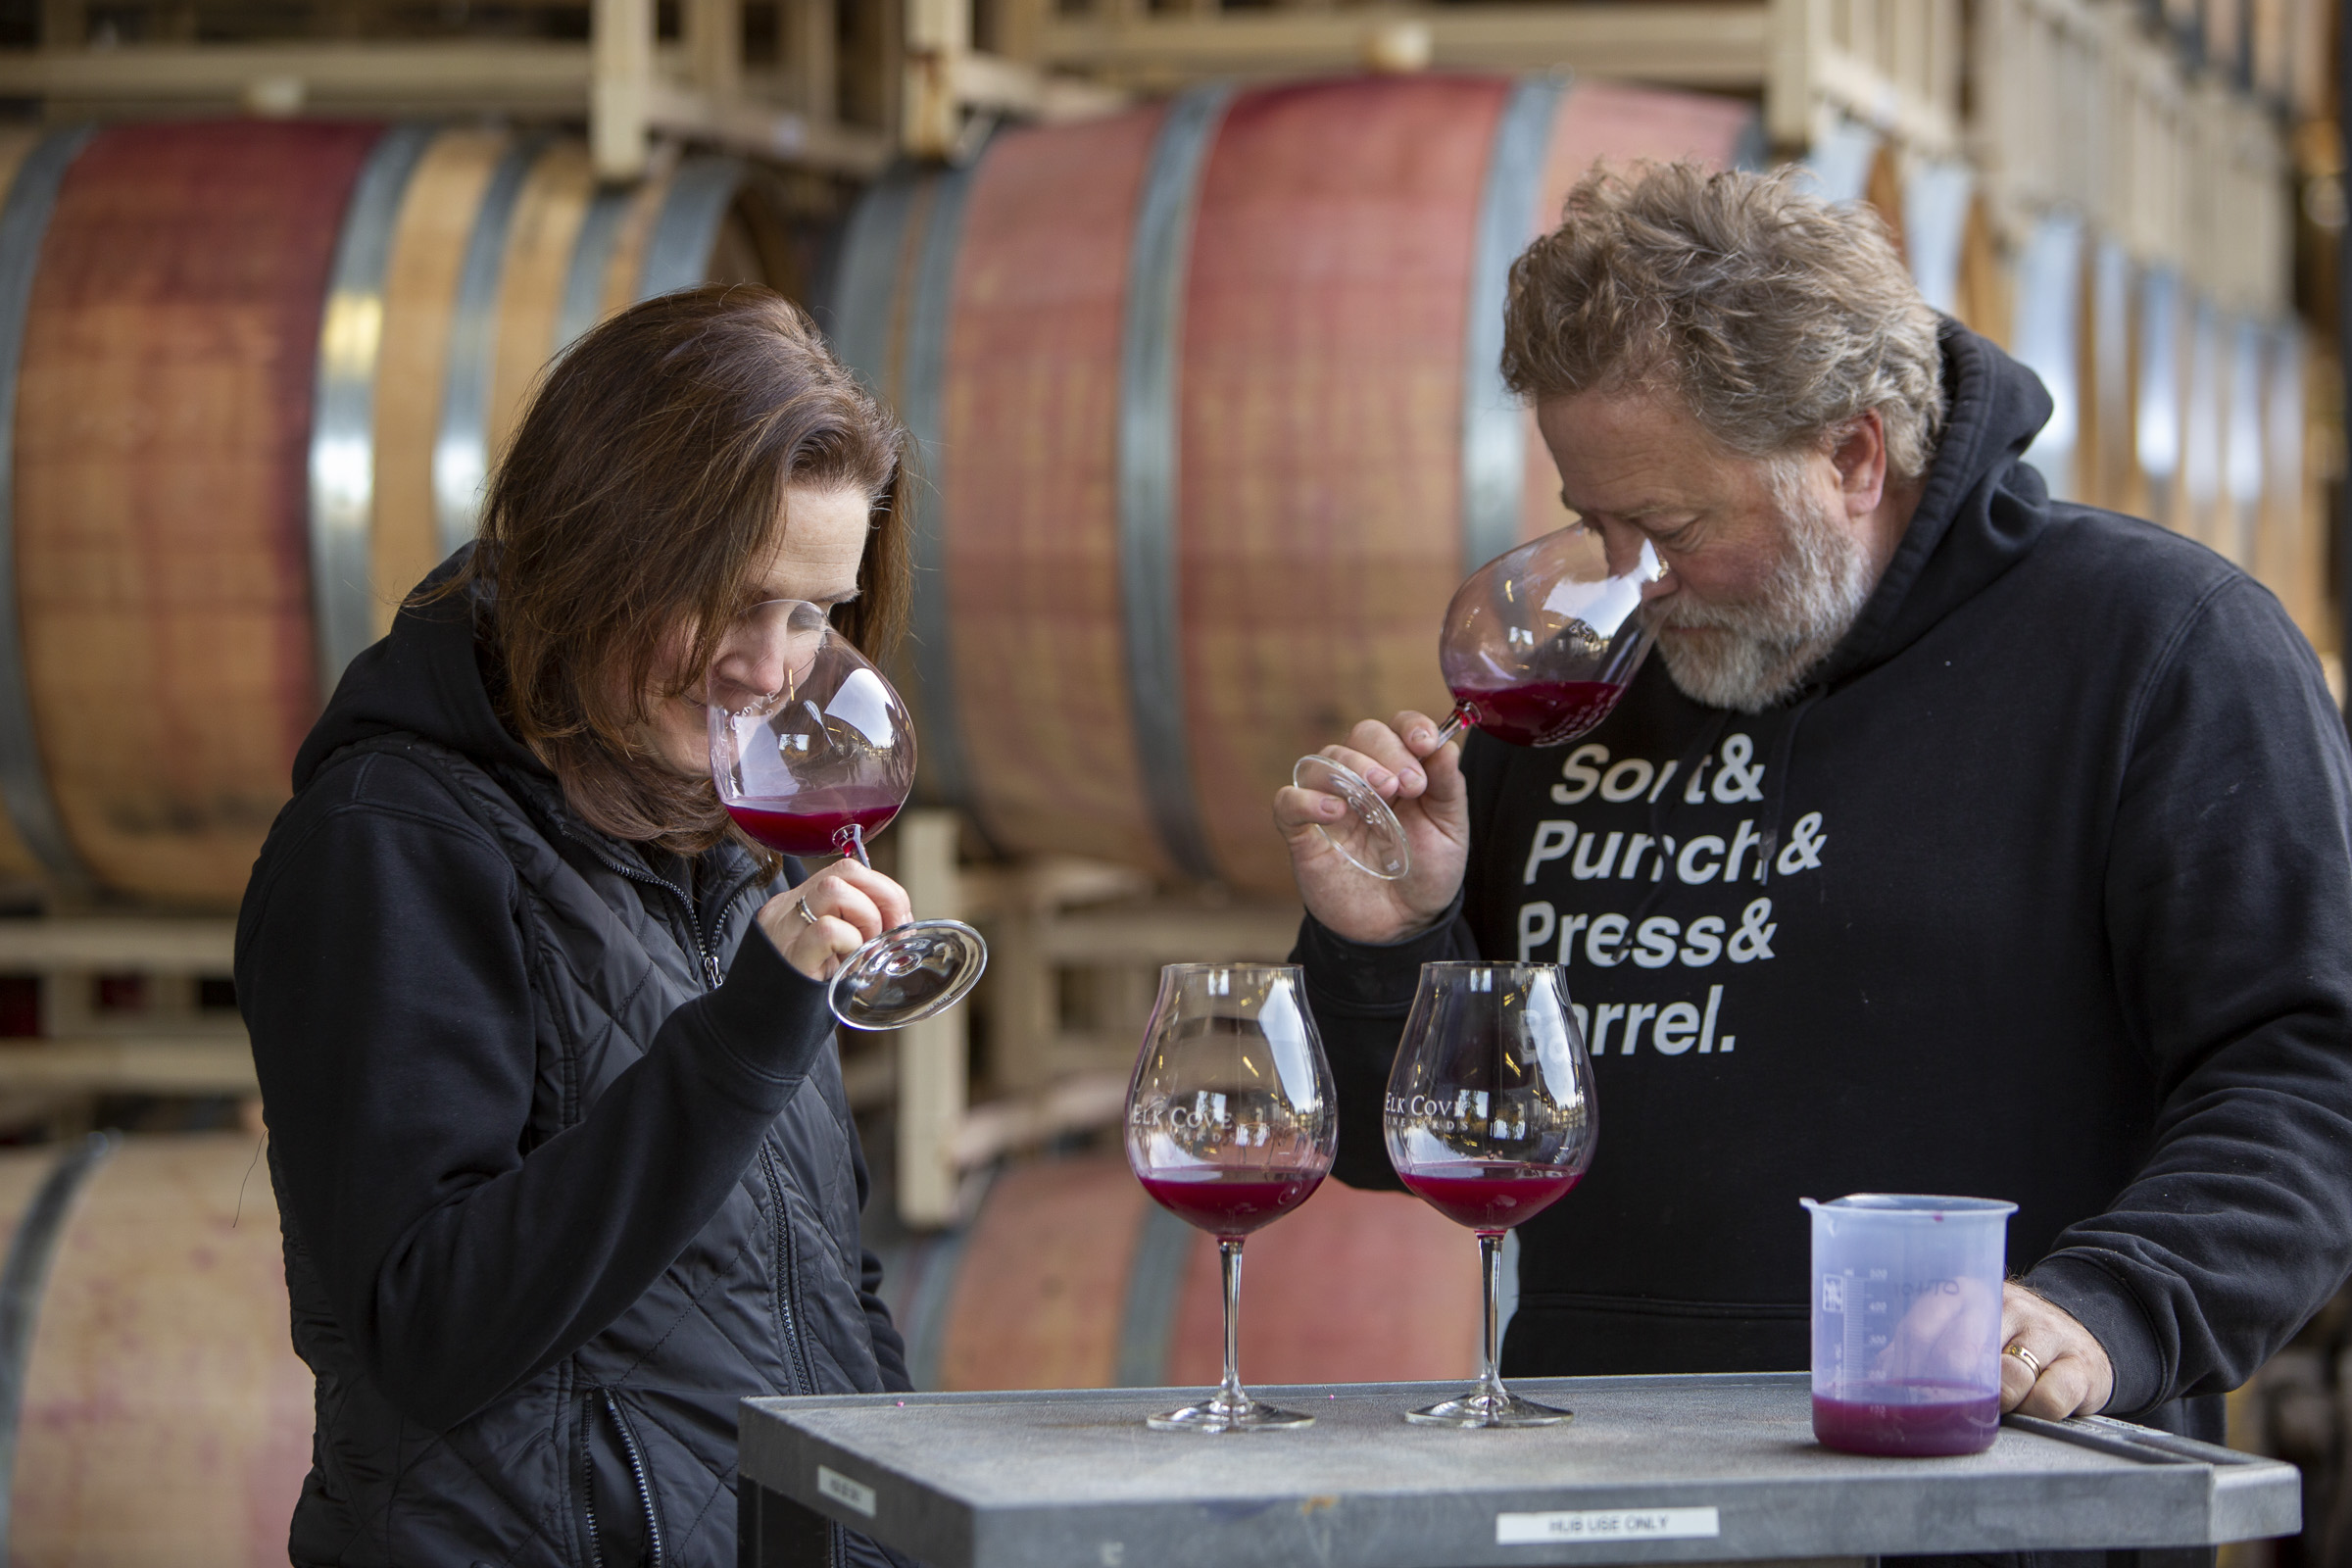 two winemakers, Adam Campbell and Heather Perkin smelling red wine samples in front of barrels